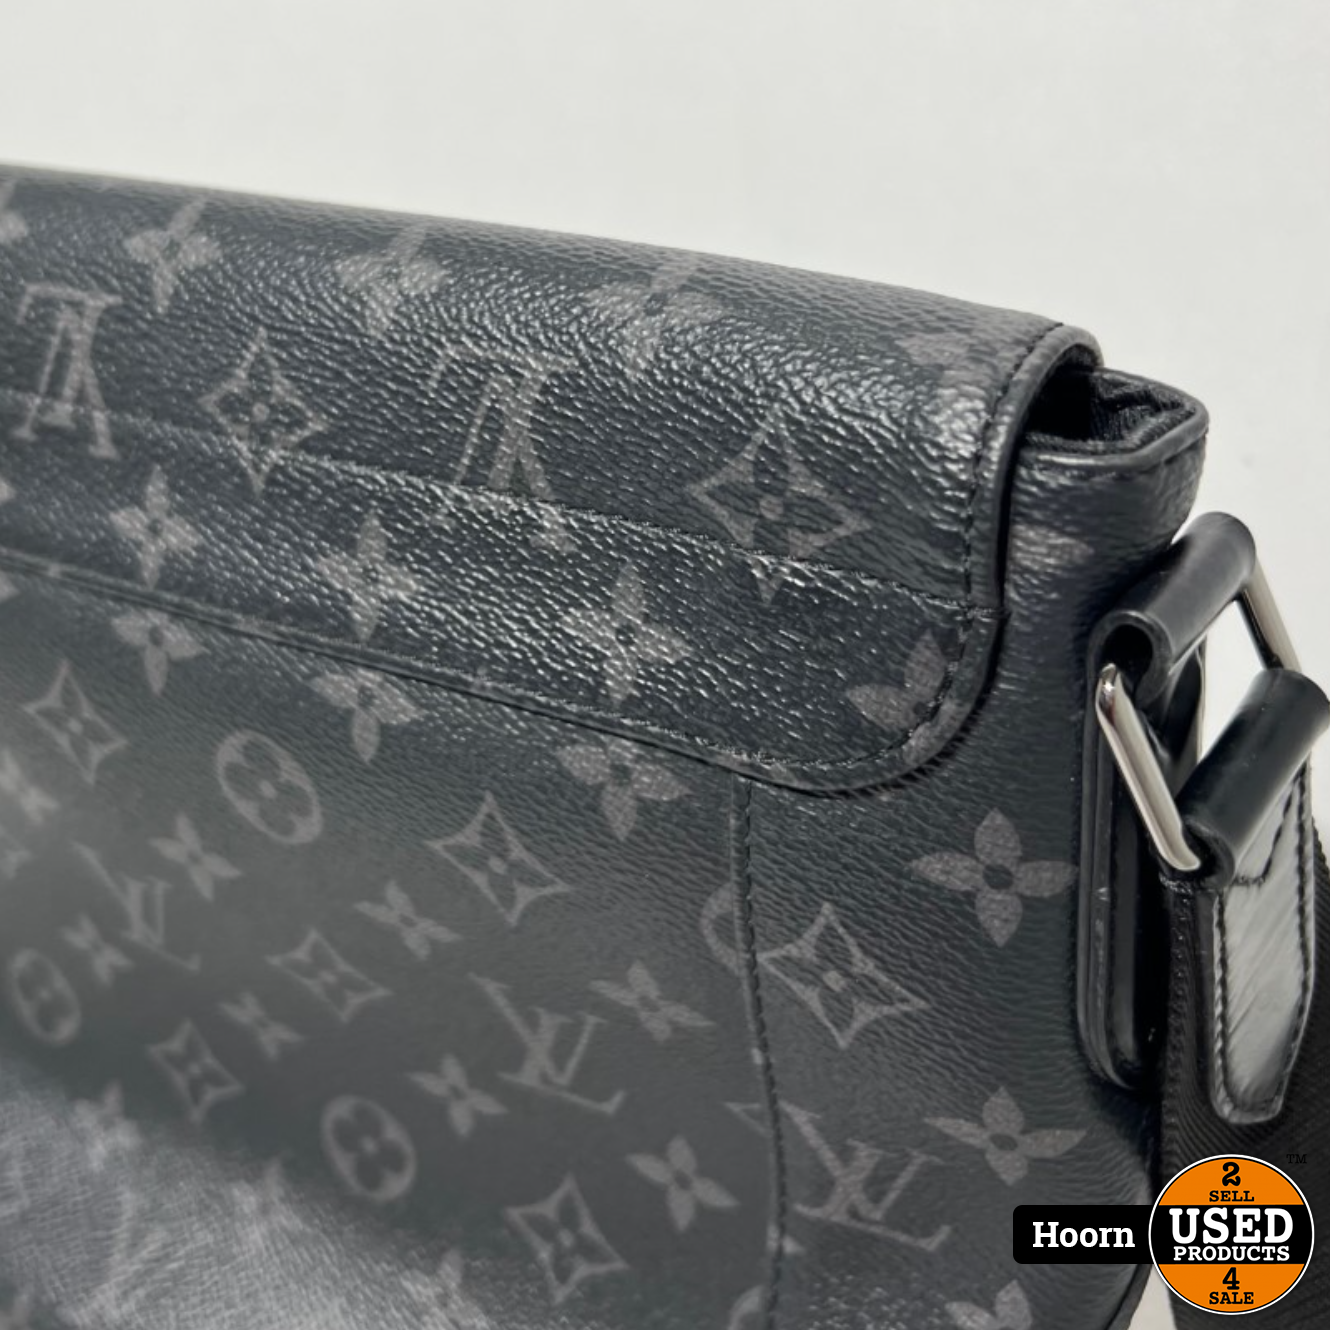 Buy [Used] LOUIS VUITTON Messenger Voyage PM Fragment Shoulder Bag Monogram  Eclipse M43277 from Japan - Buy authentic Plus exclusive items from Japan